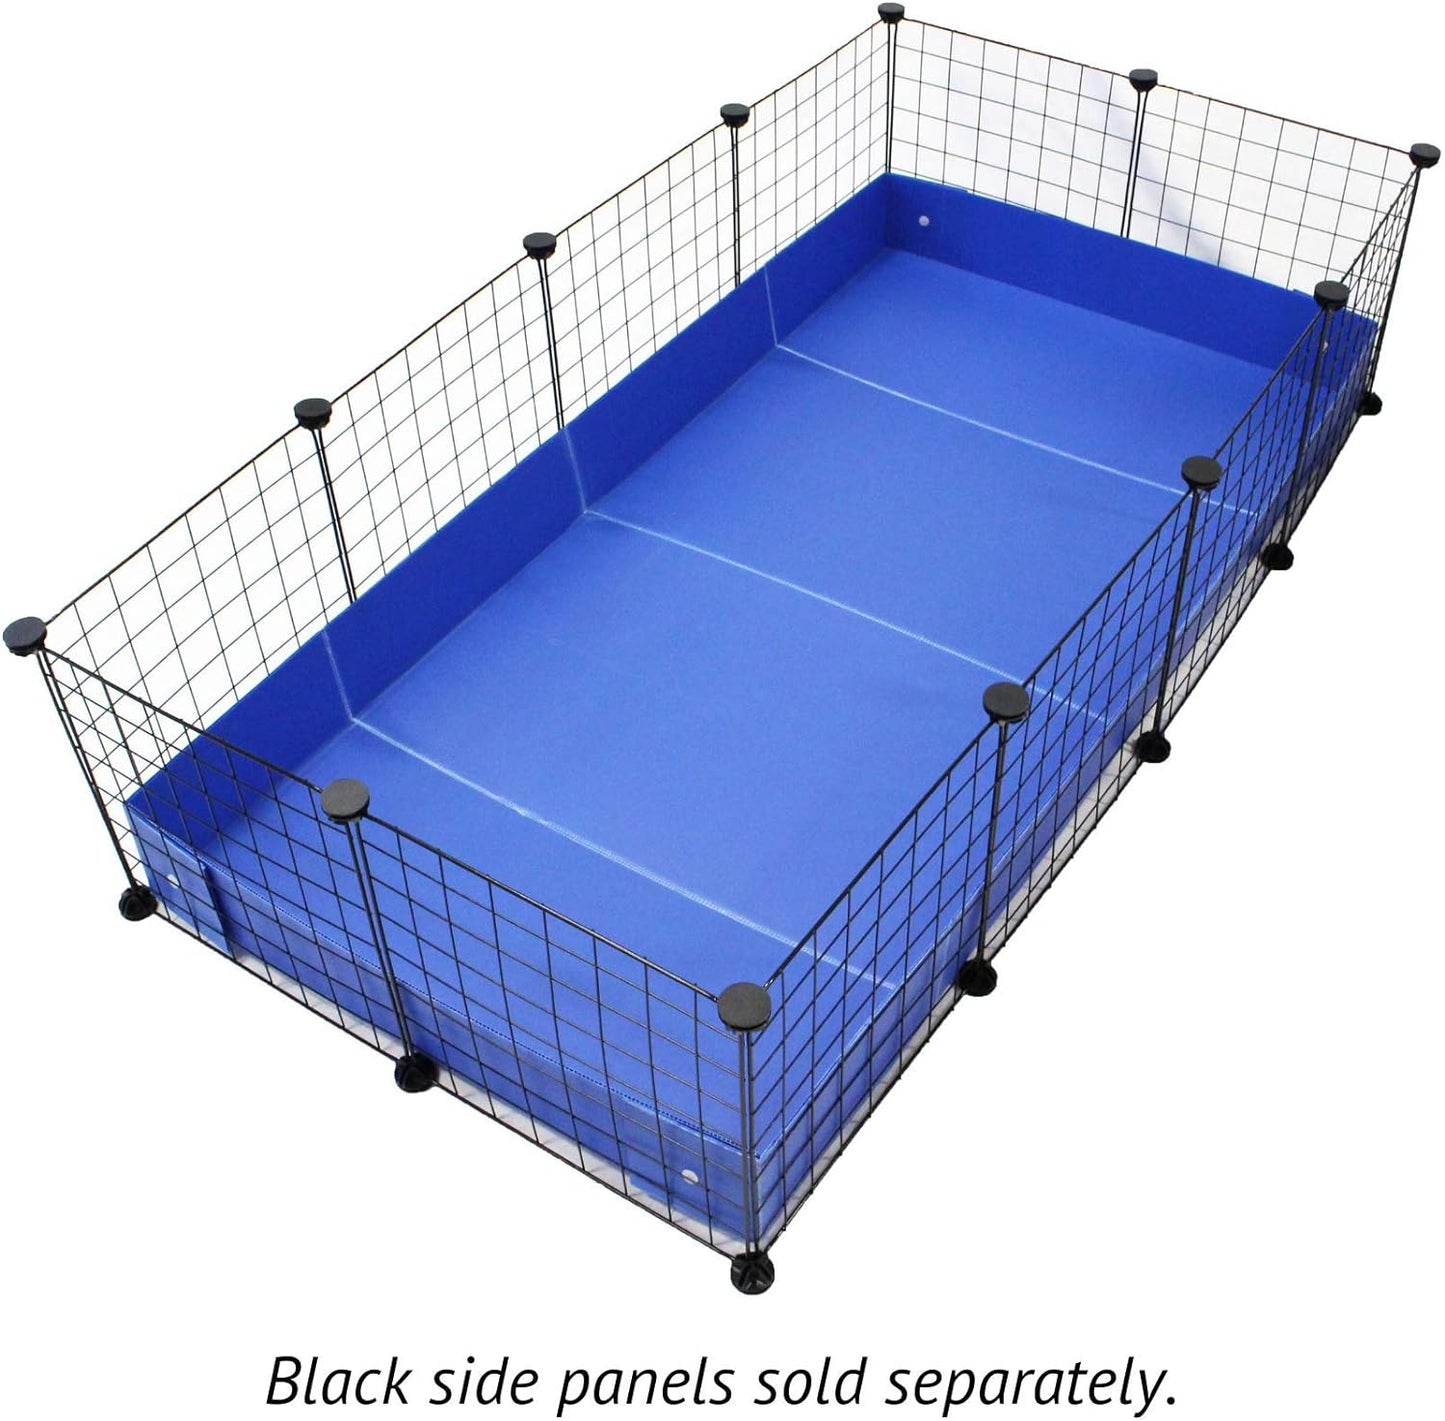 Midlee Corrugated Plastic Guinea Pig Cage Liner- 4x2 Panel Size